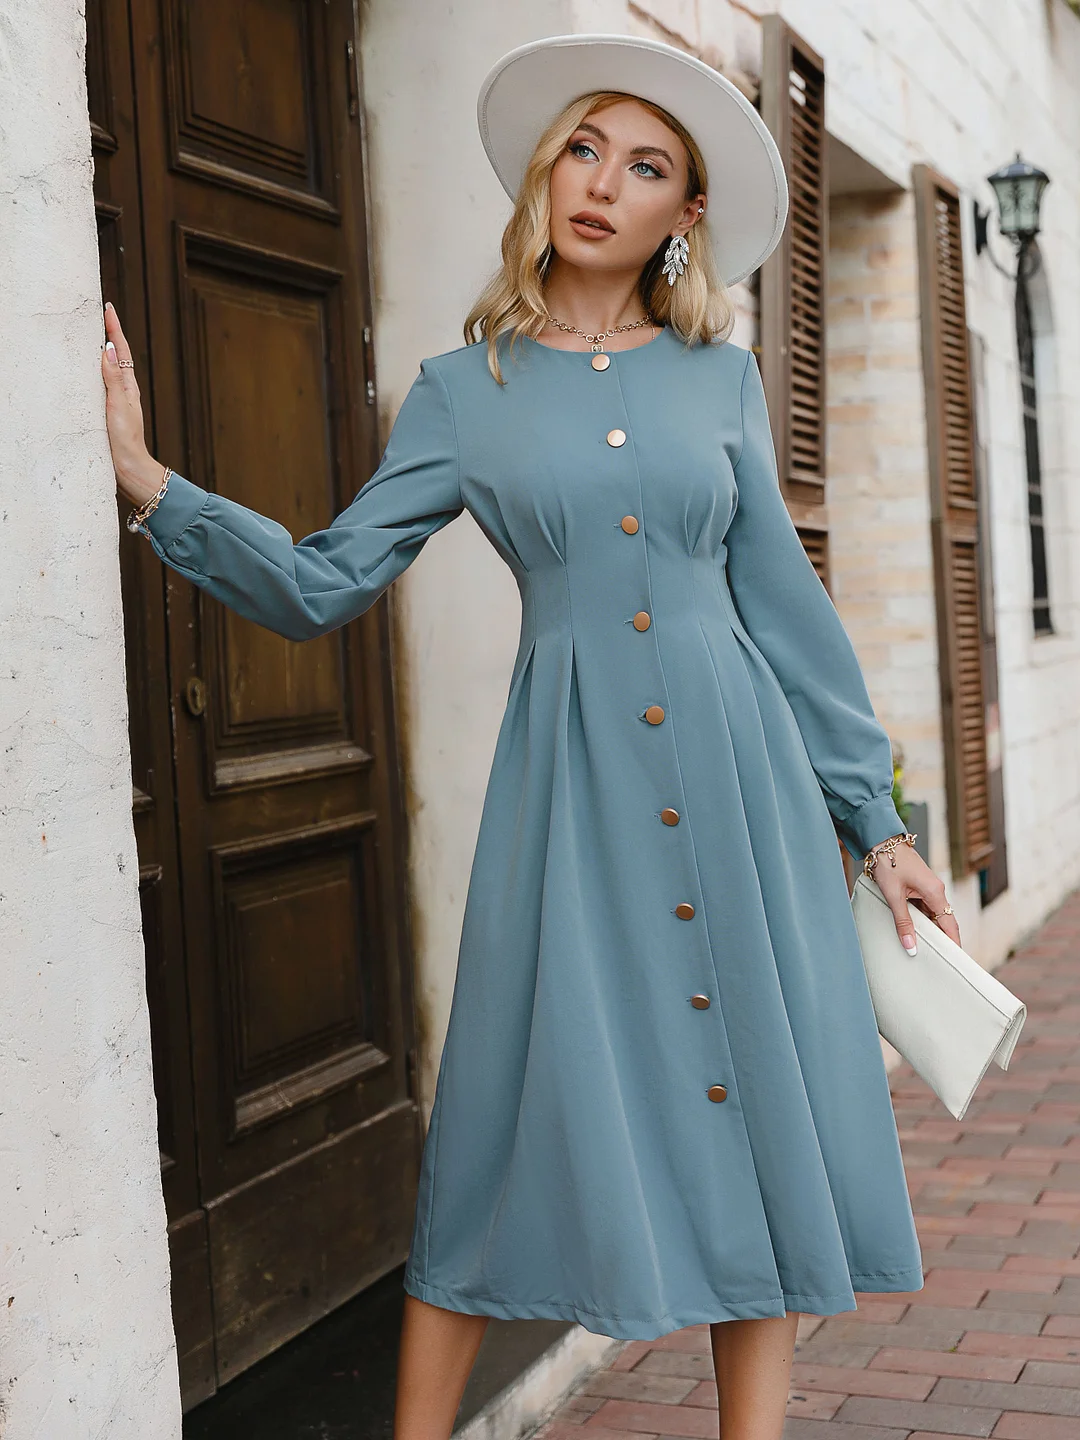 Simplee Vintage A-line buttons women dress autumn Elegant o-neck blue midi dresses Office lady female long sleeves solid vestido